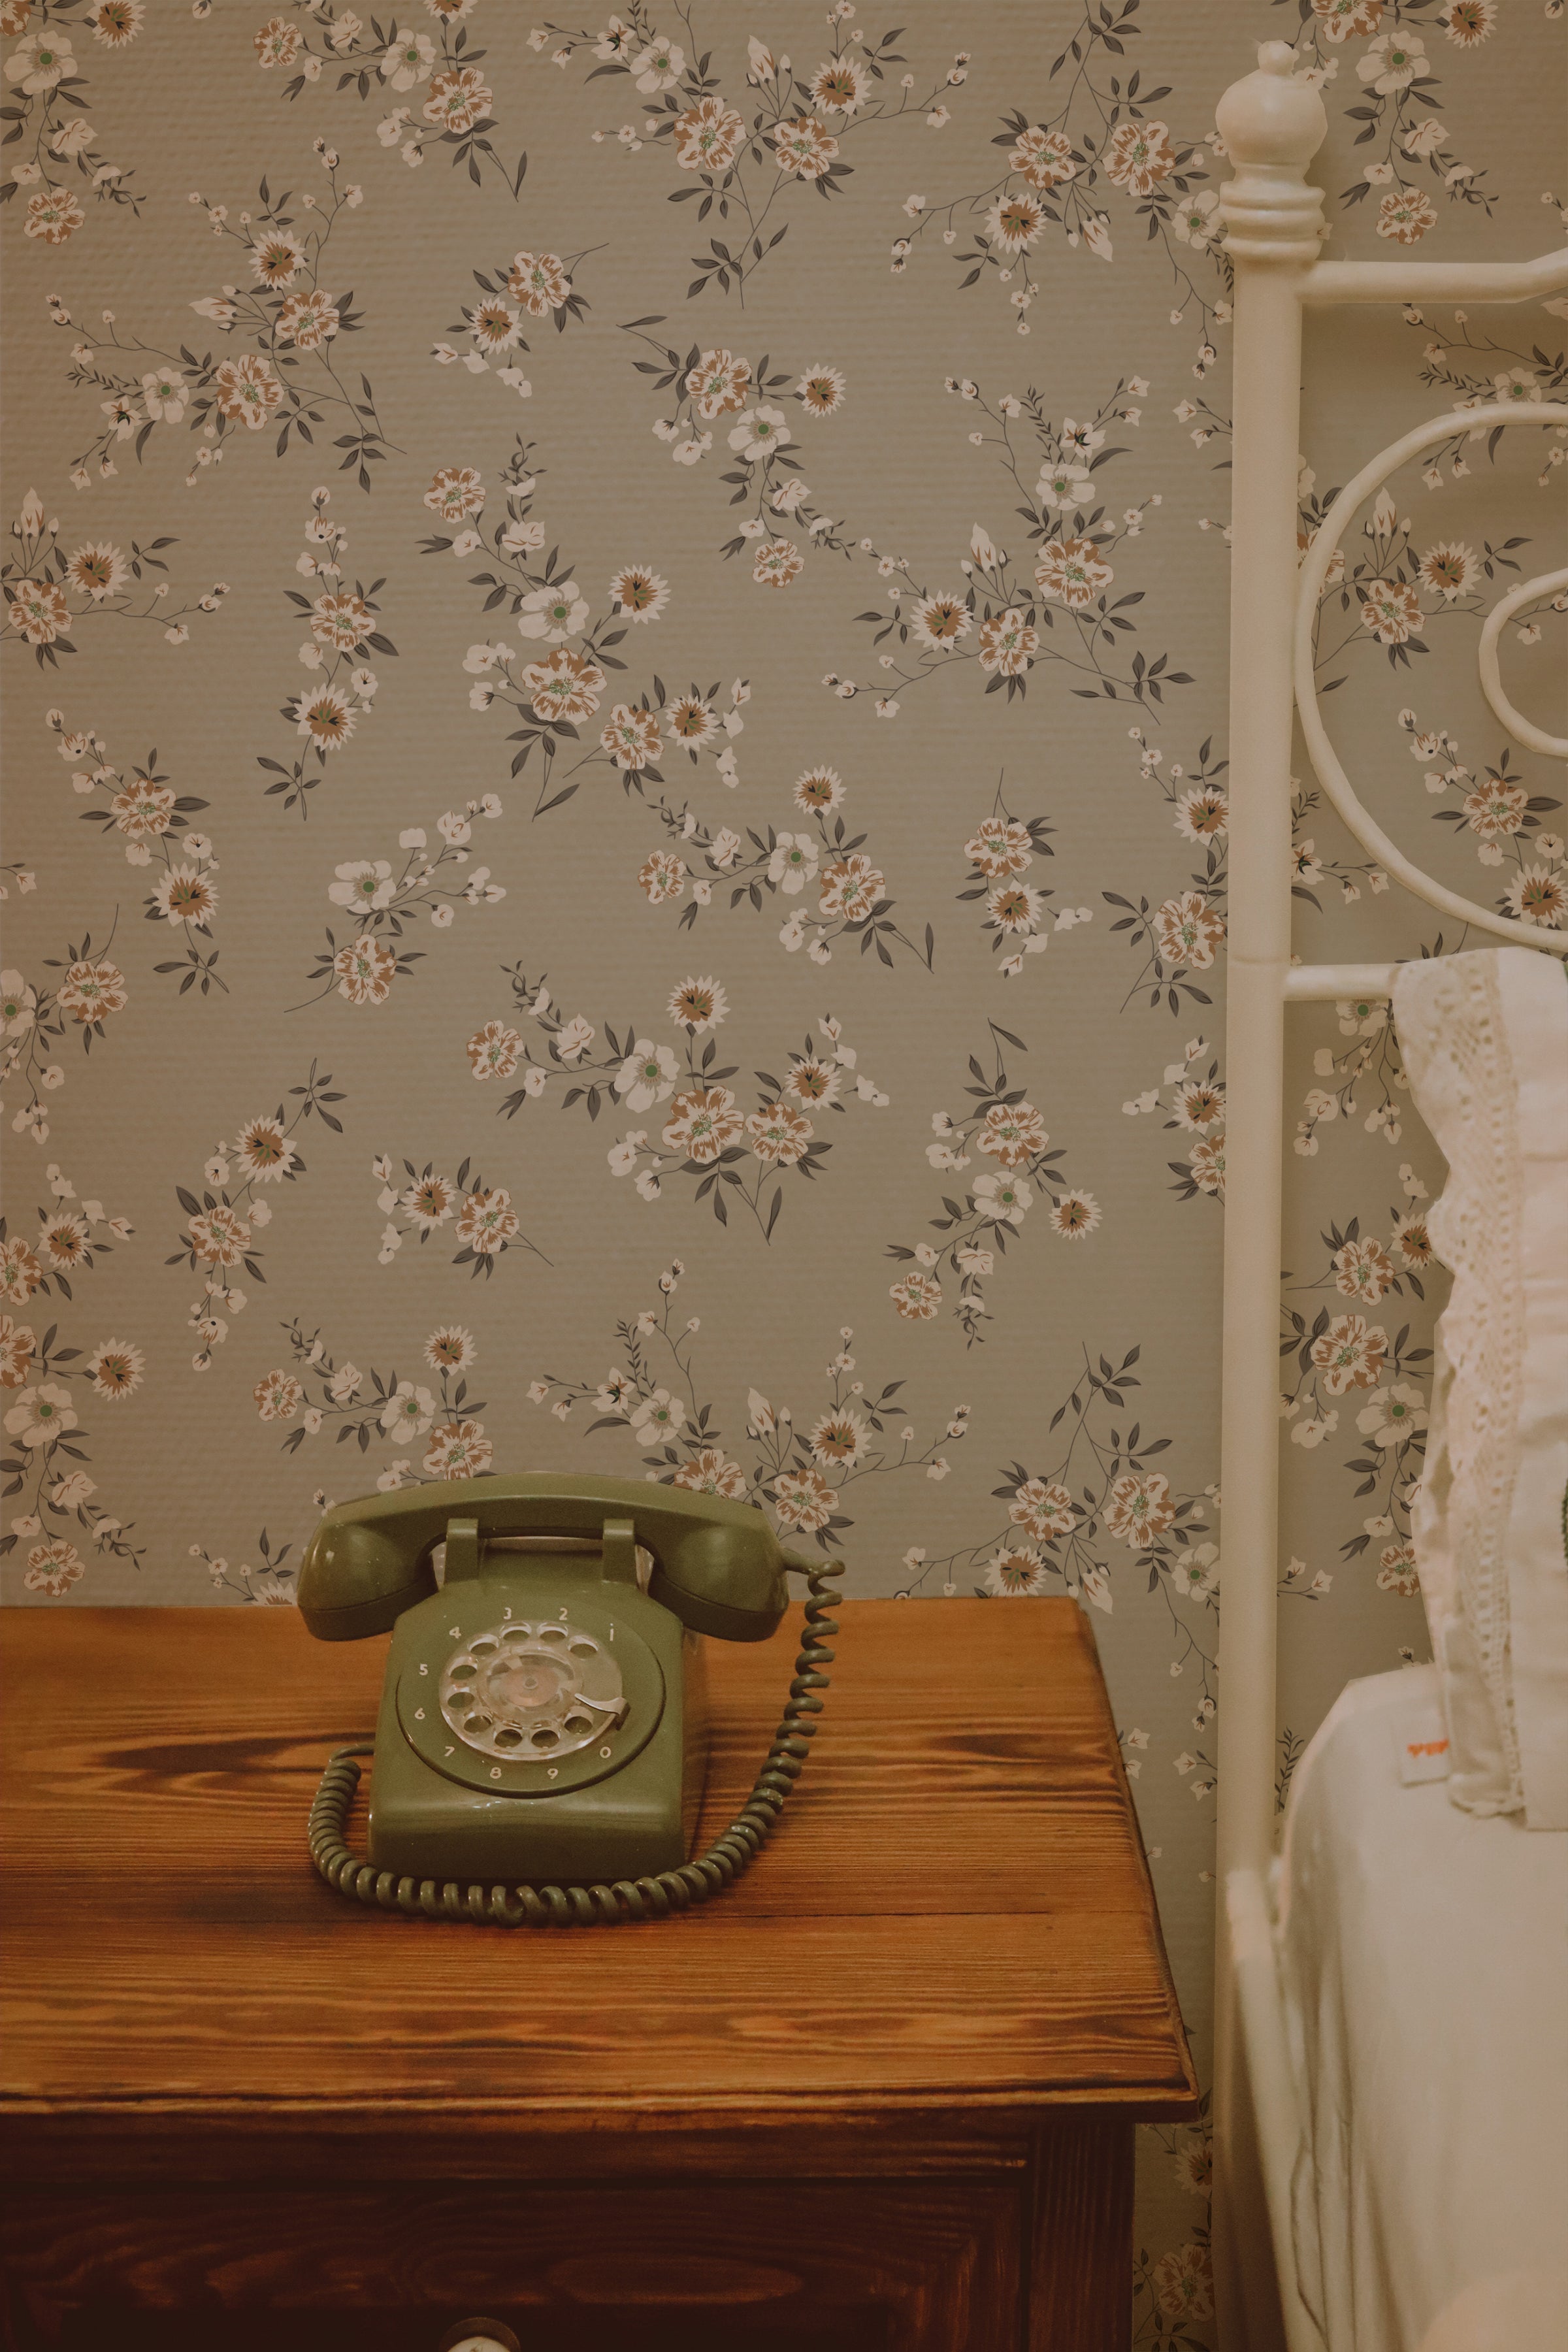 A vintage bedroom corner with the Classic Floral Wallpaper providing a nostalgic backdrop. The wallpaper’s floral pattern exudes a timeless grace, paired with a retro green telephone on a wooden nightstand. The soft hues and floral design enhance the room's romantic and historical ambience.